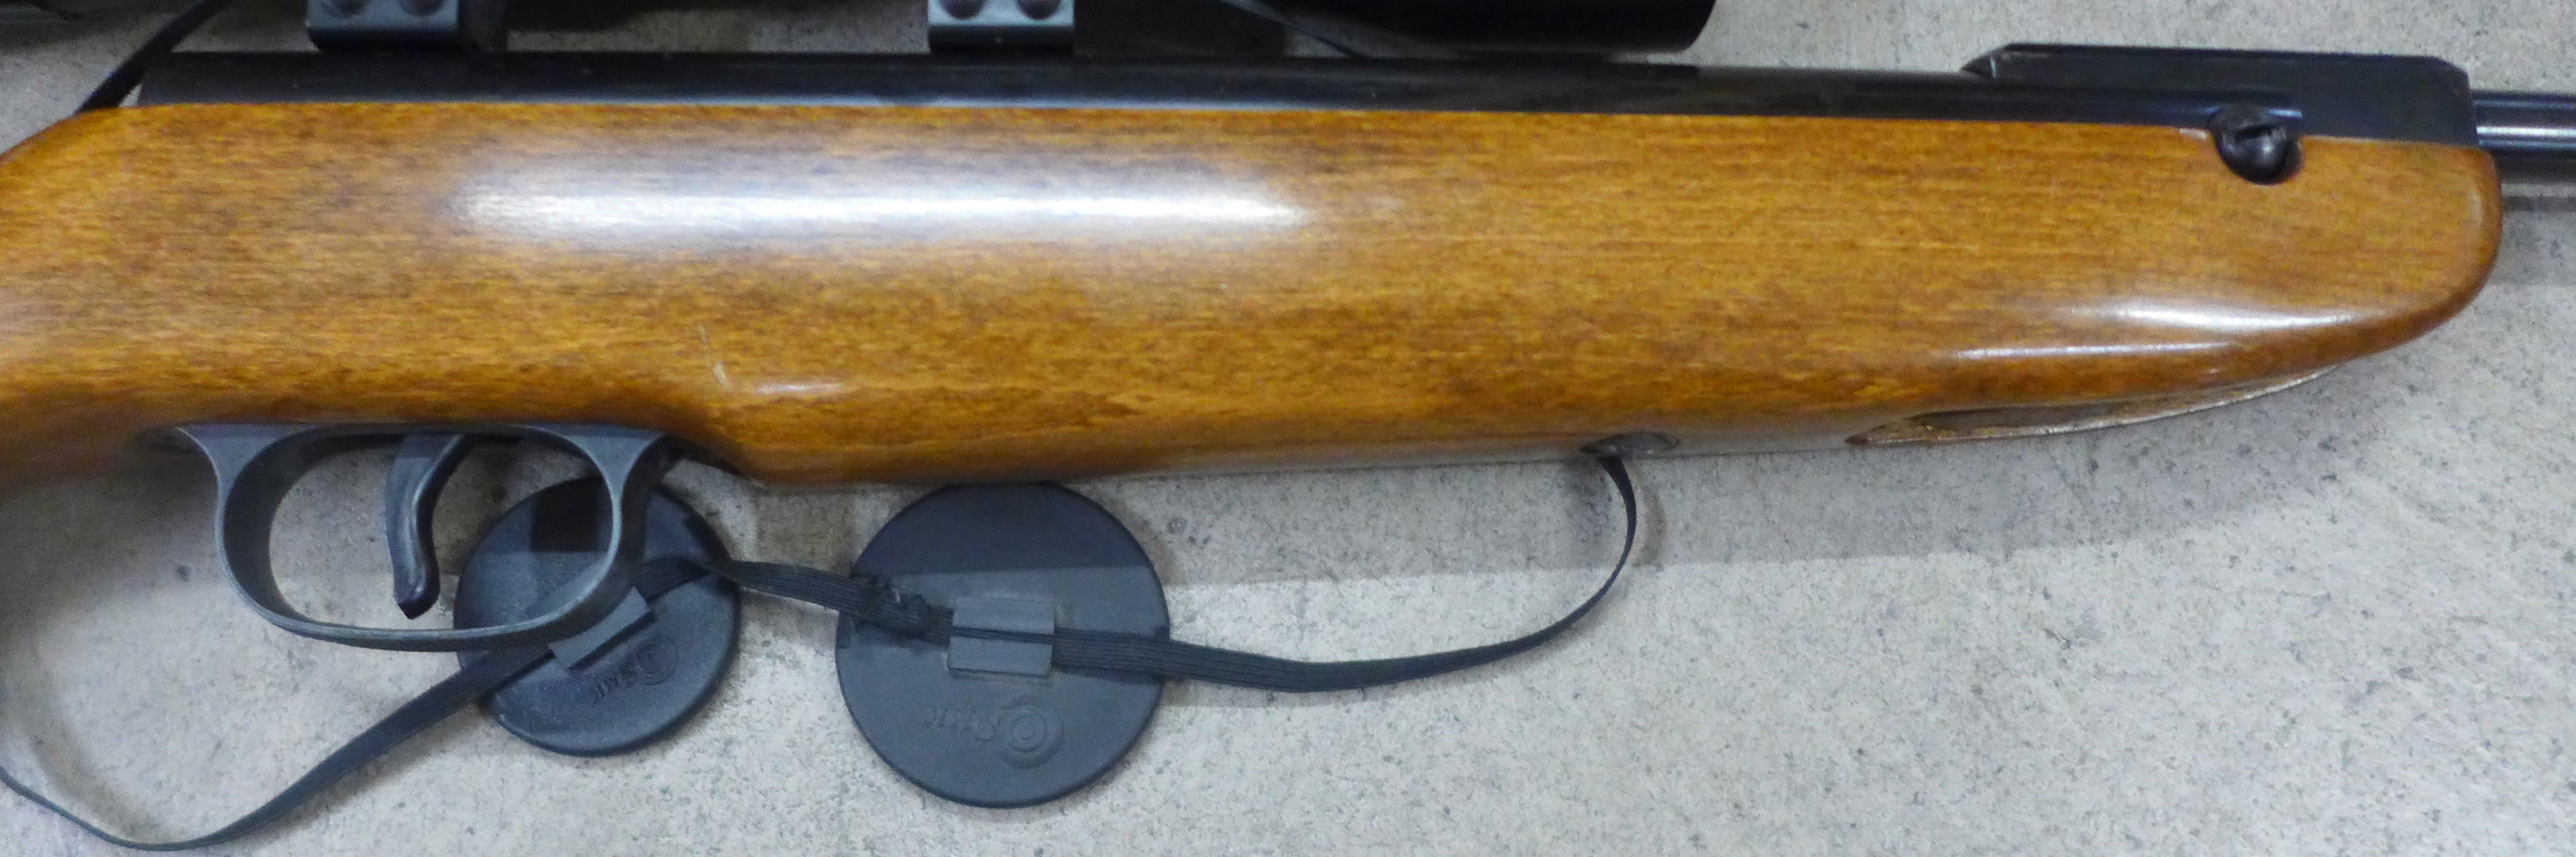 A Weihrauch HW 30 .177 calibre air rifle, with scope and silencer - Image 6 of 9